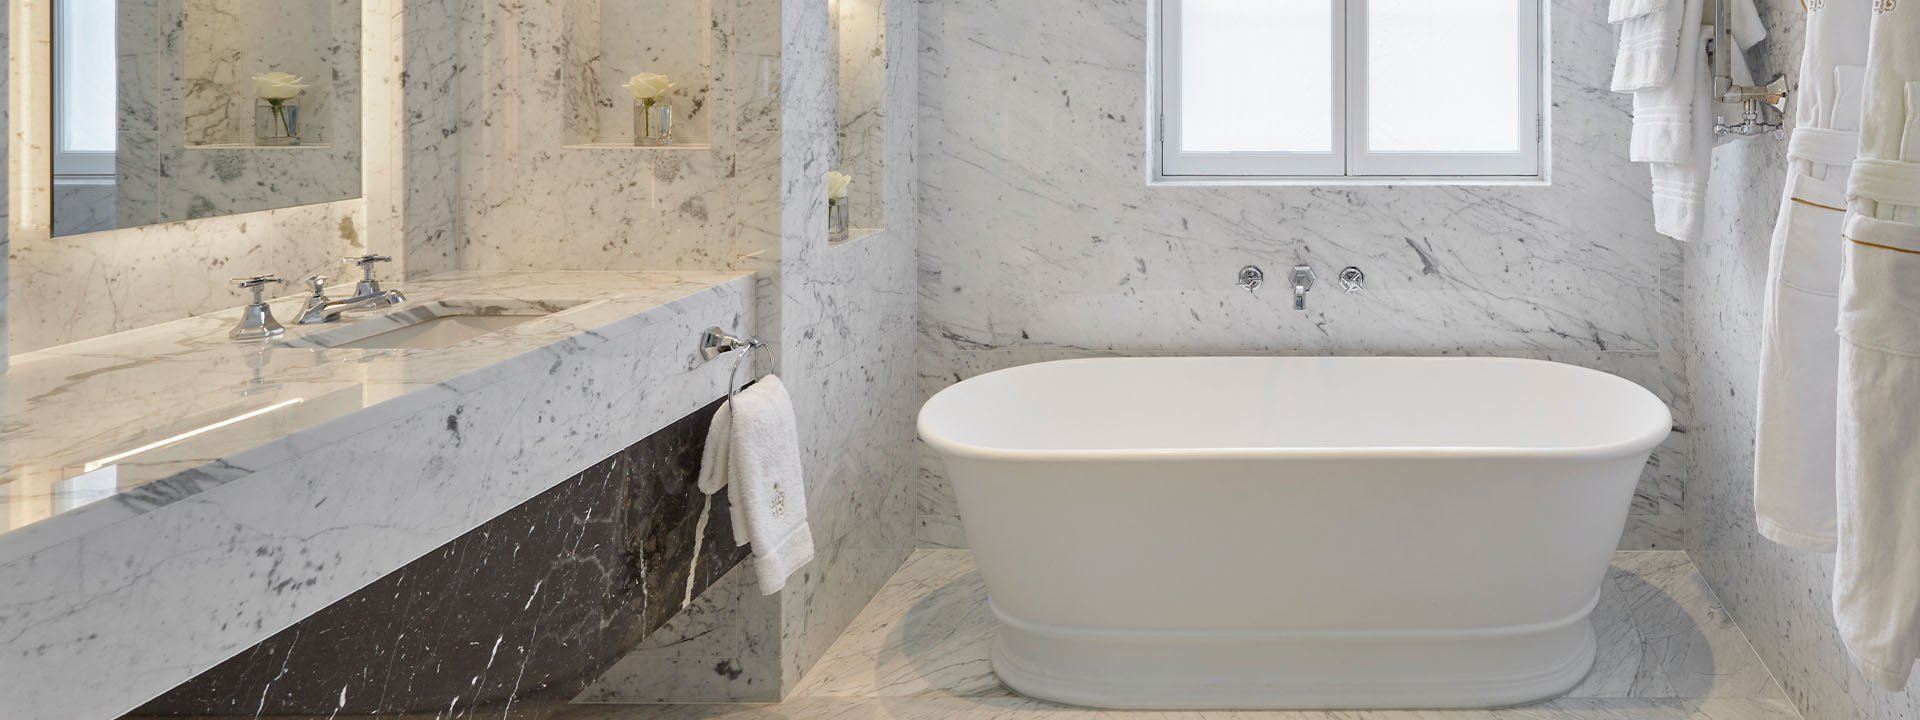 White marble bathroom with big freestanding bath tub at the end of the roo a sink to the left and dressing gowns and white towels hung up on the wall on the right. m